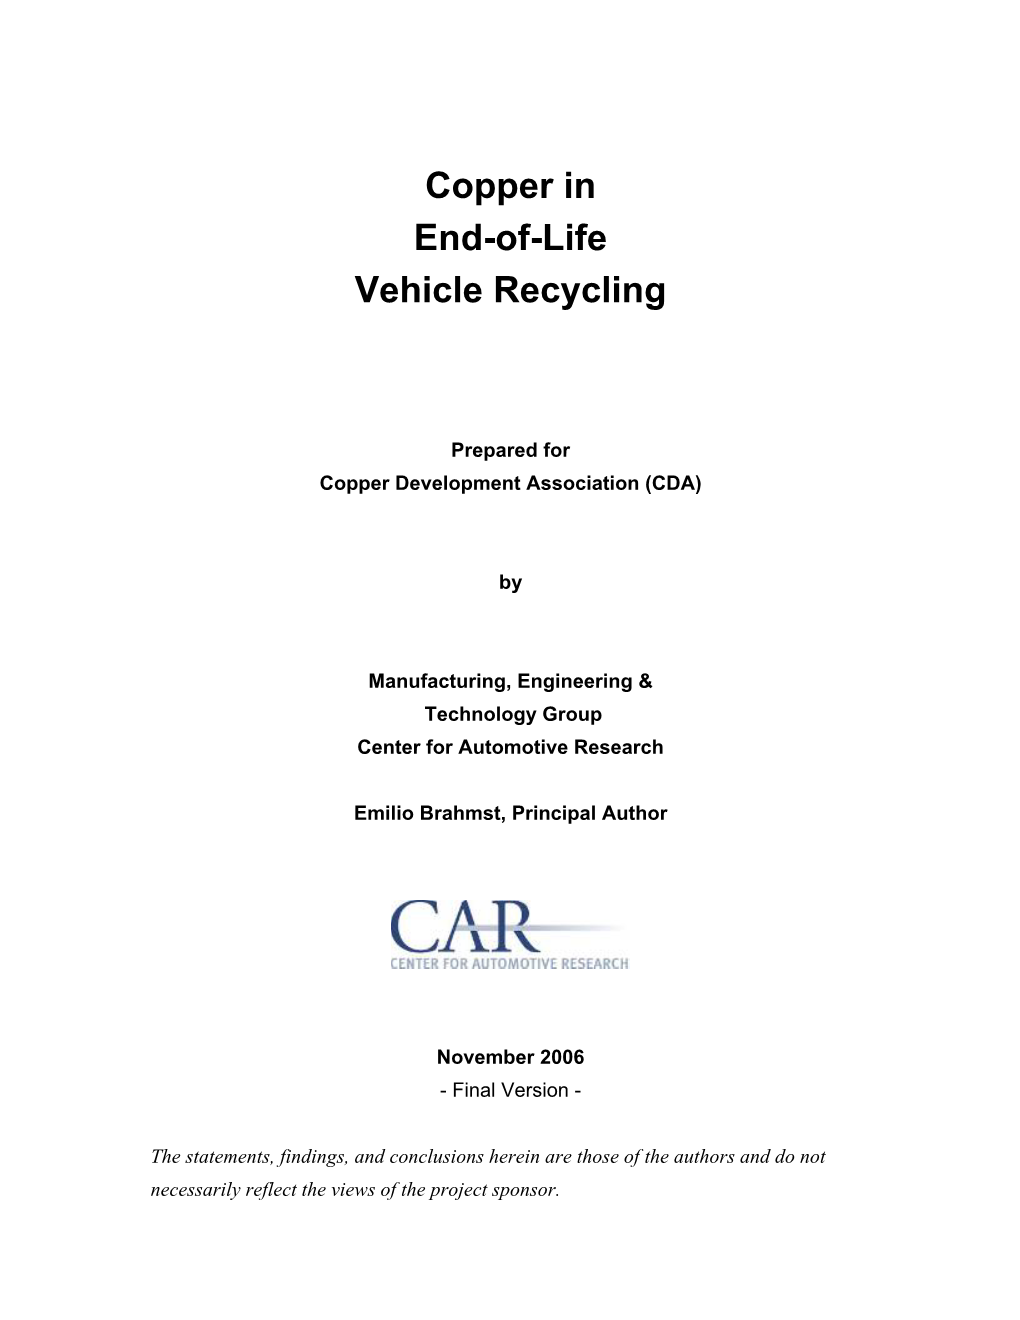 Copper in End-Of-Life Vehicle Recycling